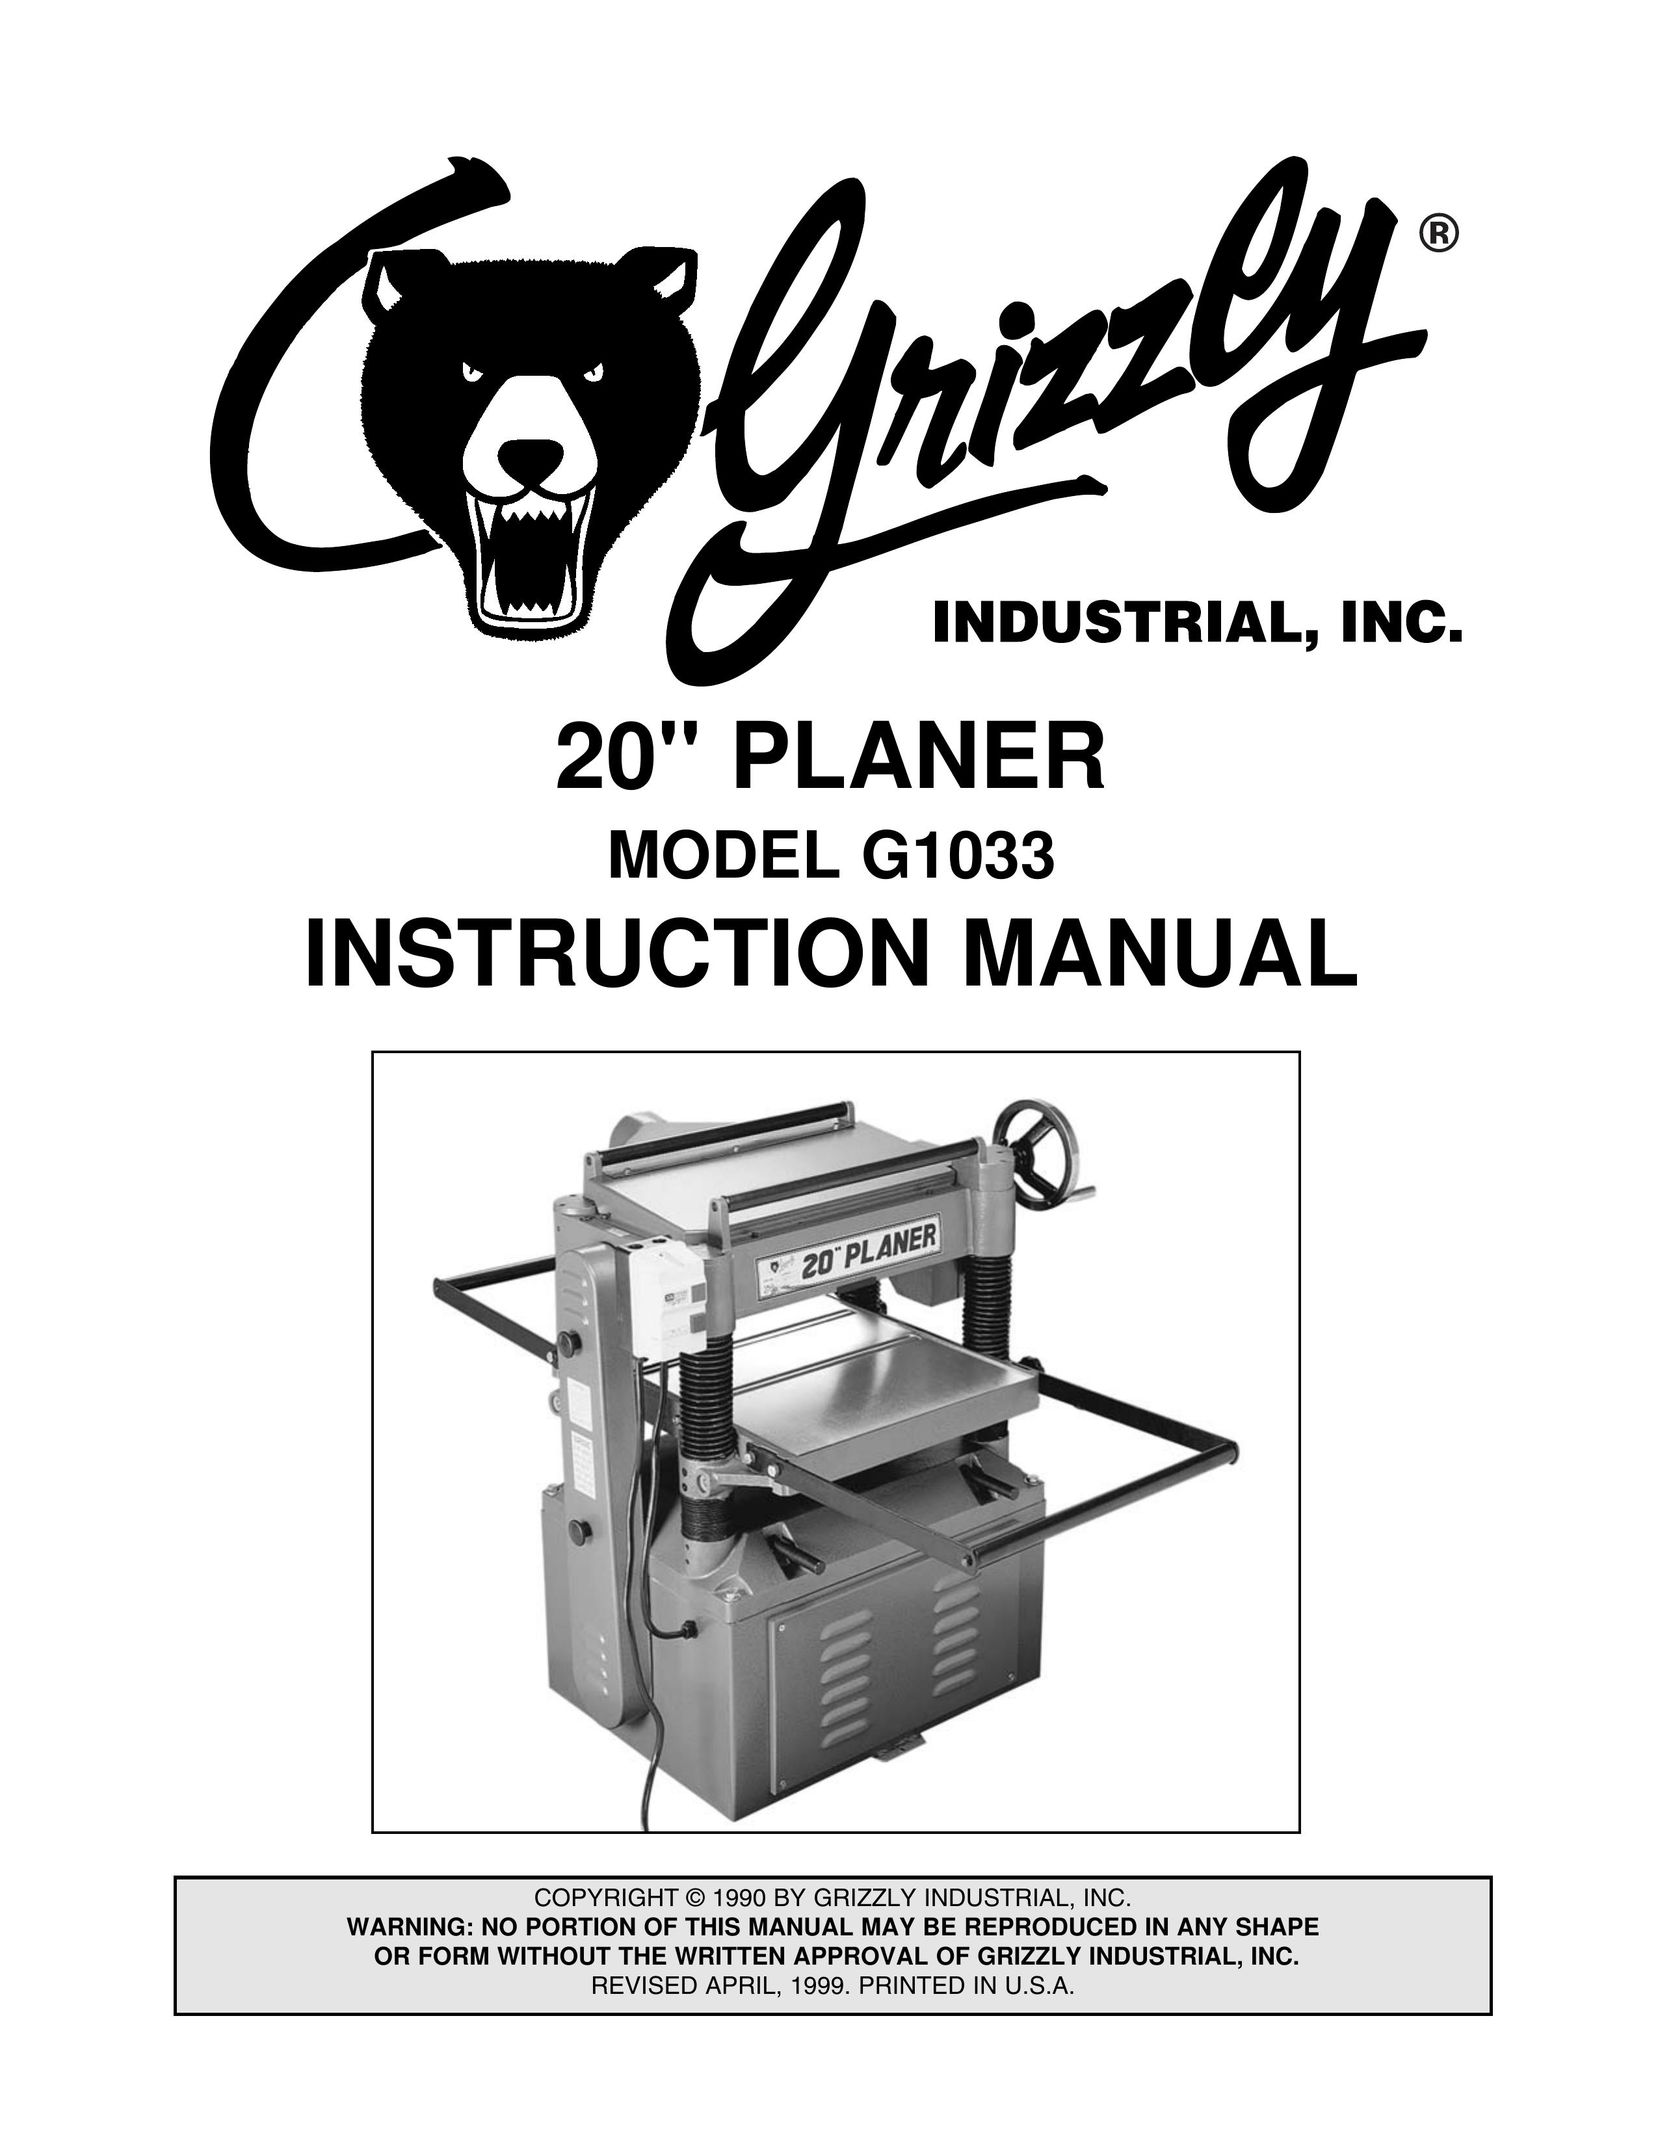 Grizzly G1033 Planer User Manual